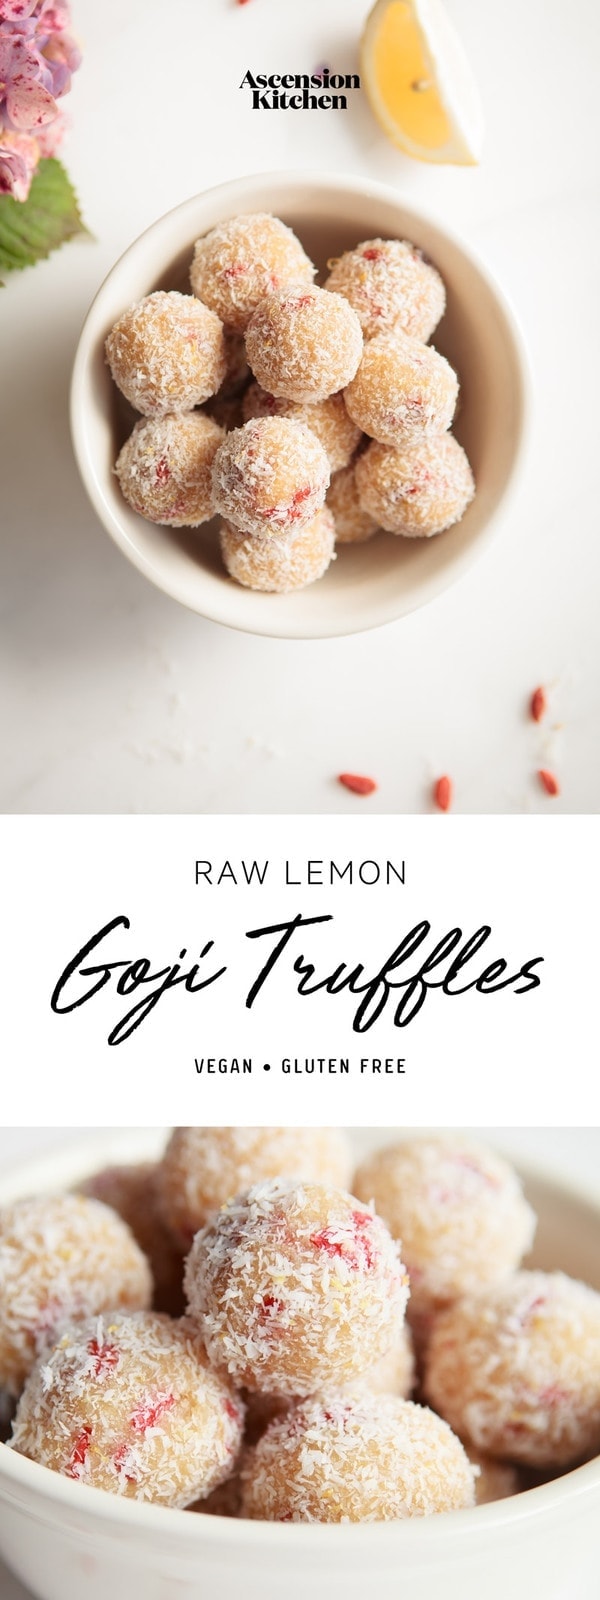 Raw Lemon Goji Truffles – a quick and simple vegan treat. #coconuttruffles #vegantruffles #lemontruffles #coconuttrufflesrecipe #coconuttrufflesrecipeeasy #AscensionKitchen // Pin to your own inspiration board! //